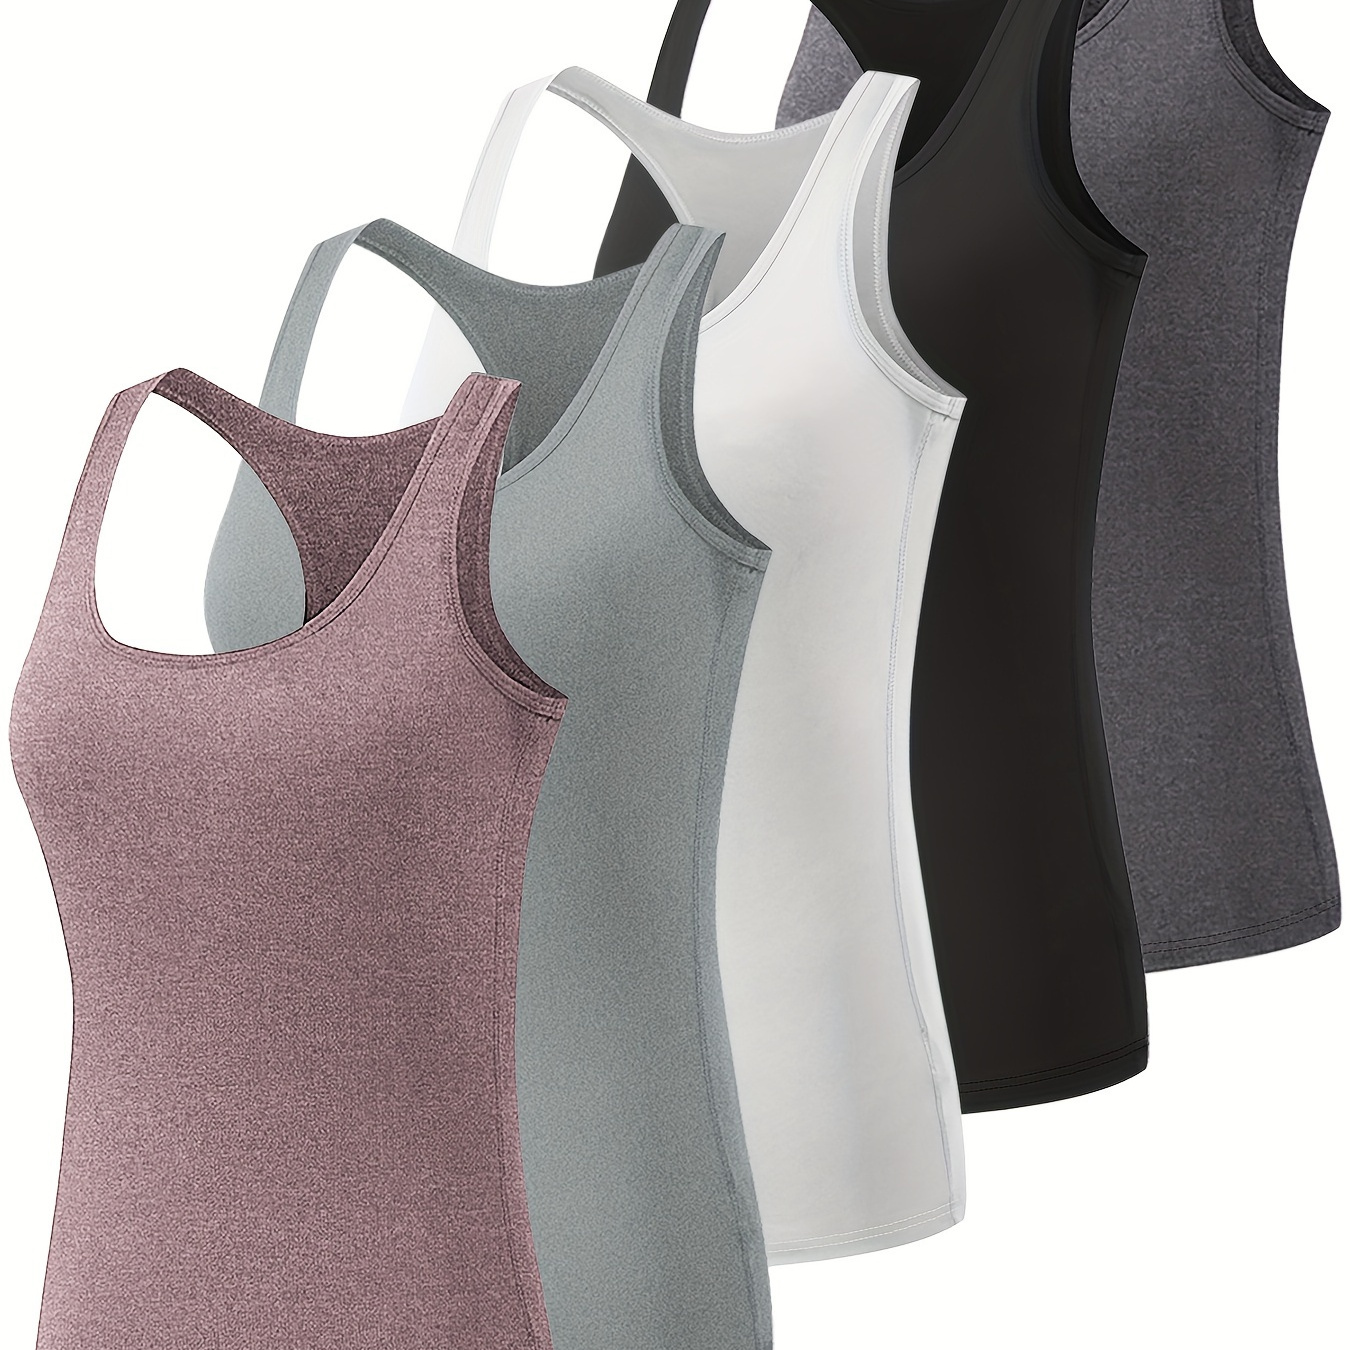 

Telaleo 5 Workout Tank Tops For Women, Athletic Racerback Sports Tank Tops, Compression Sleeveless Shirts, Order 1 Size Up For Perfect Fit